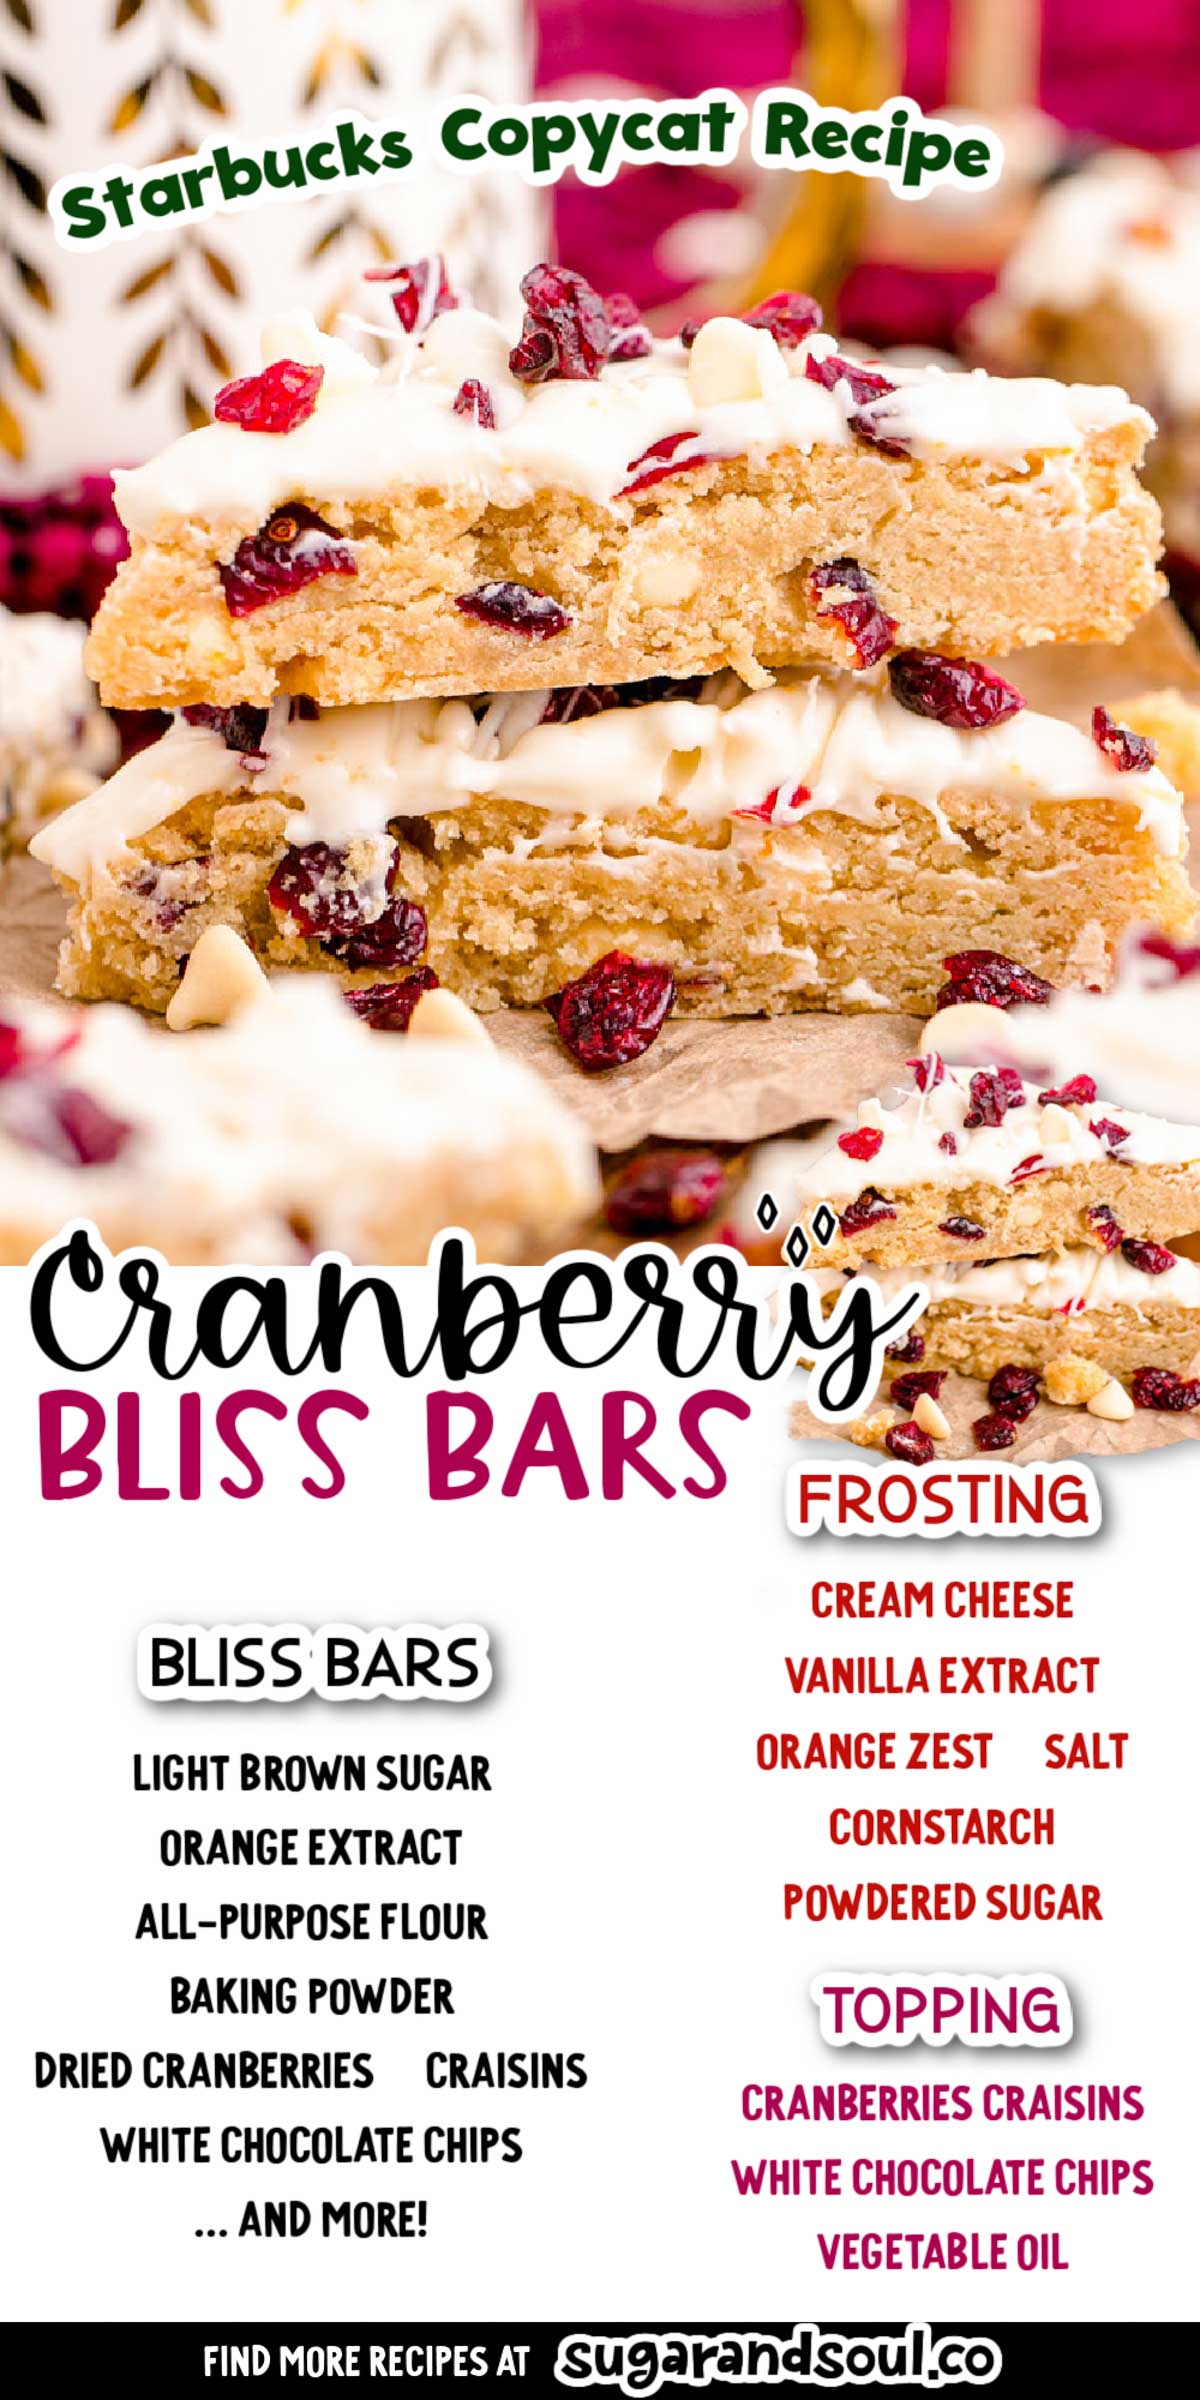 Cranberry Bliss Bars is a Starbucks Copycat Recipe that has a cream cheese frosting, a white chocolate drizzle, and chewy cranberries! This recipe makes two dozen bars that are filled with the delicious flavors of the season! via @sugarandsoulco